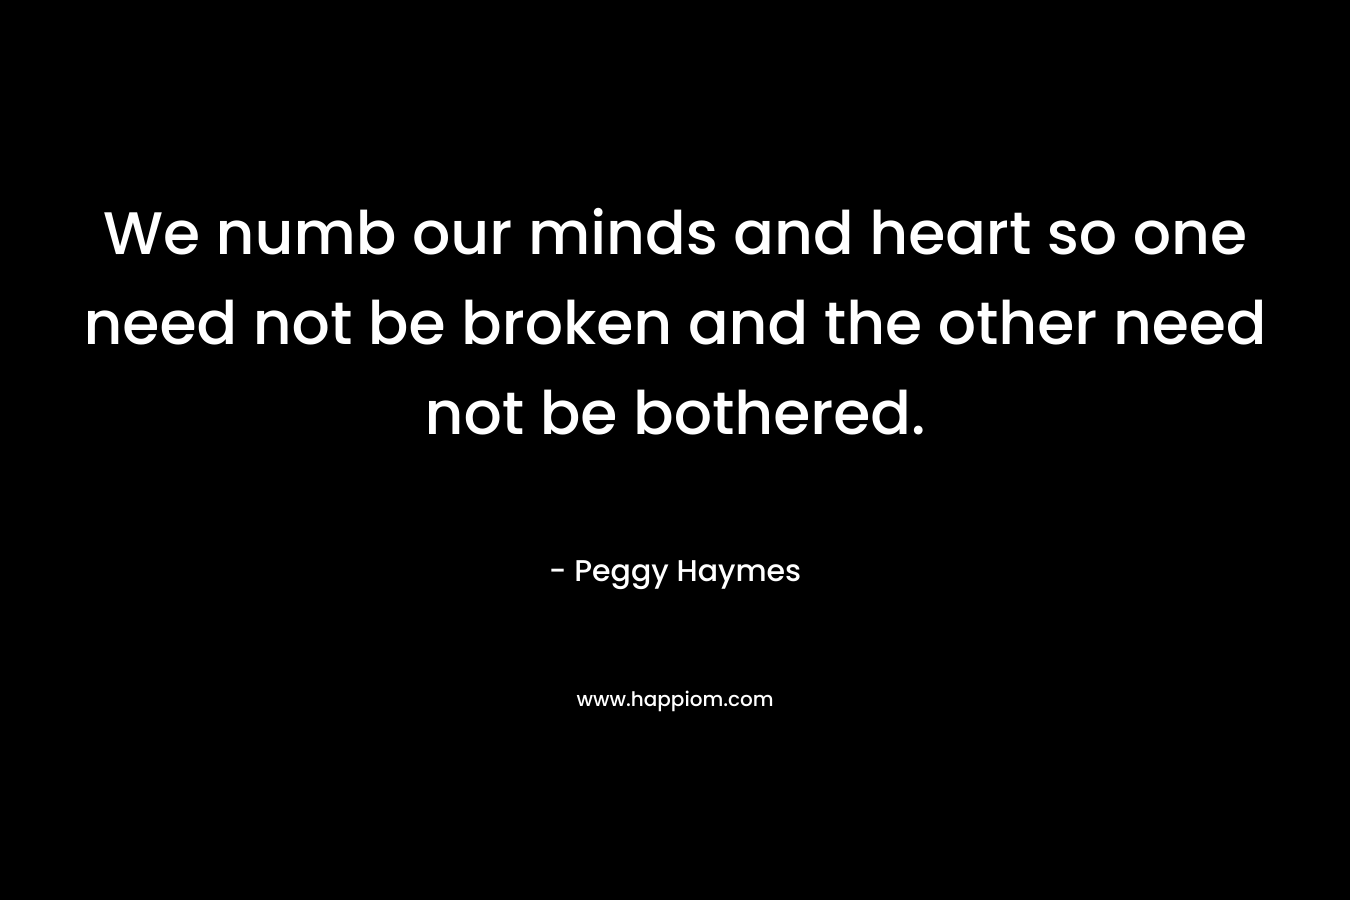 We numb our minds and heart so one need not be broken and the other need not be bothered.